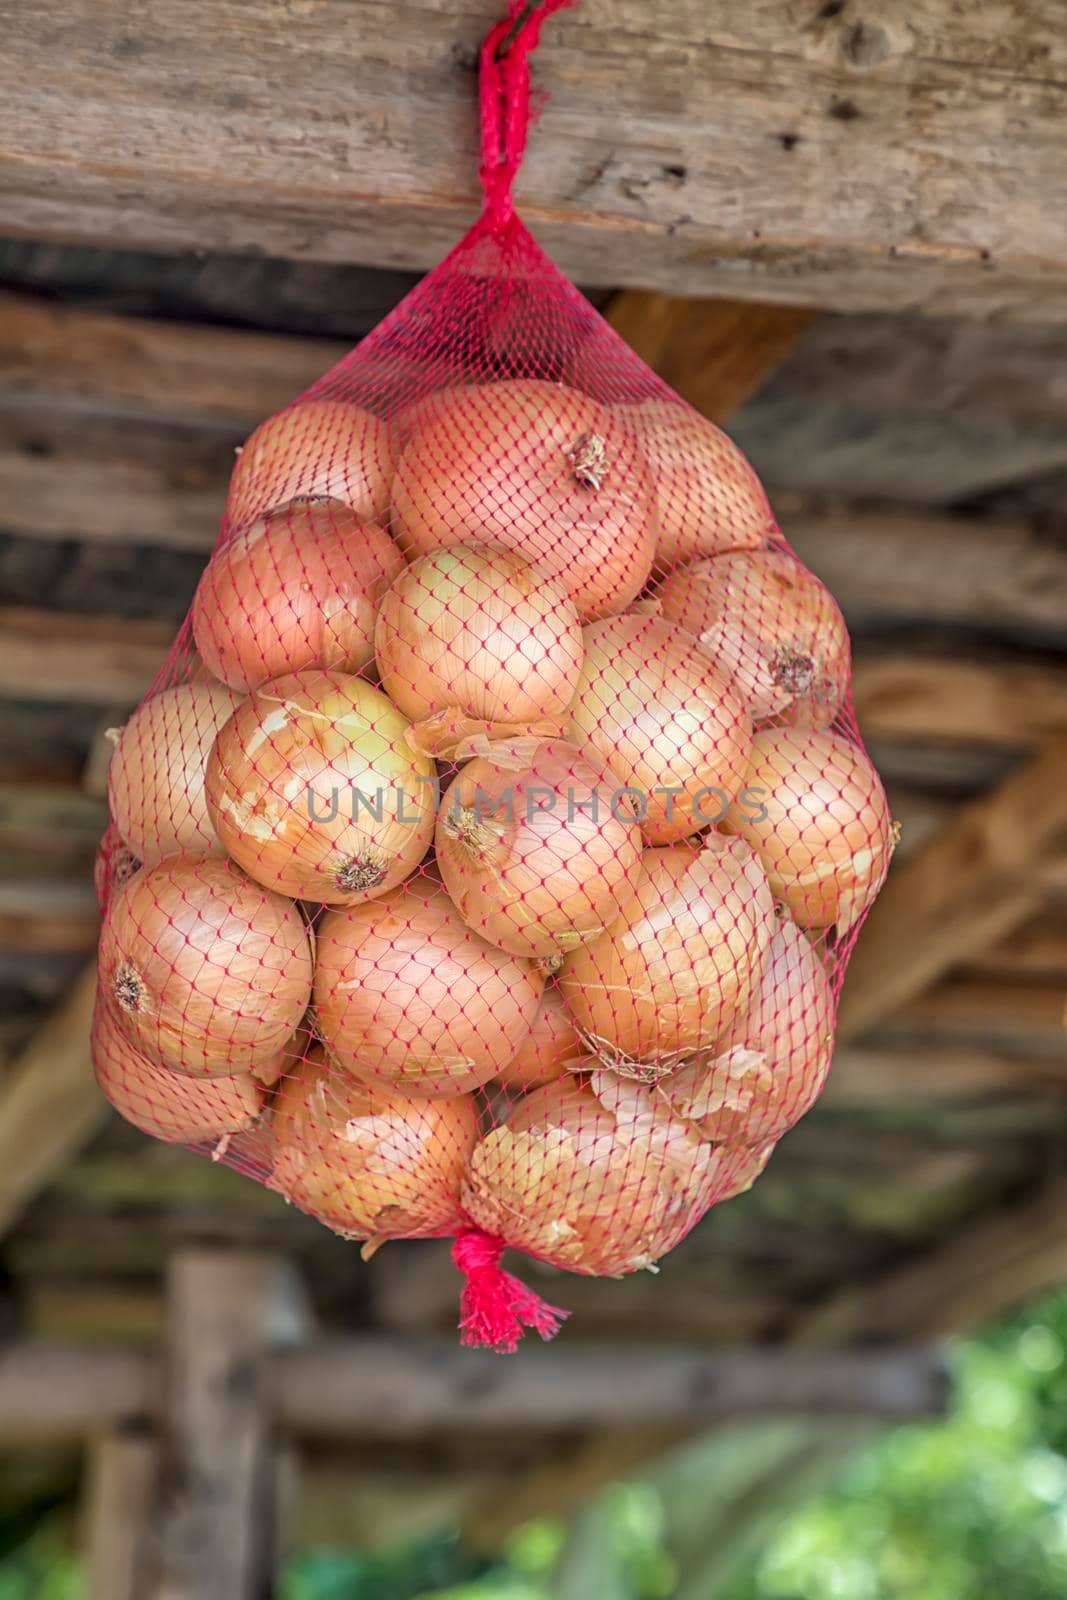 Organic yellow onion in the bag at a market